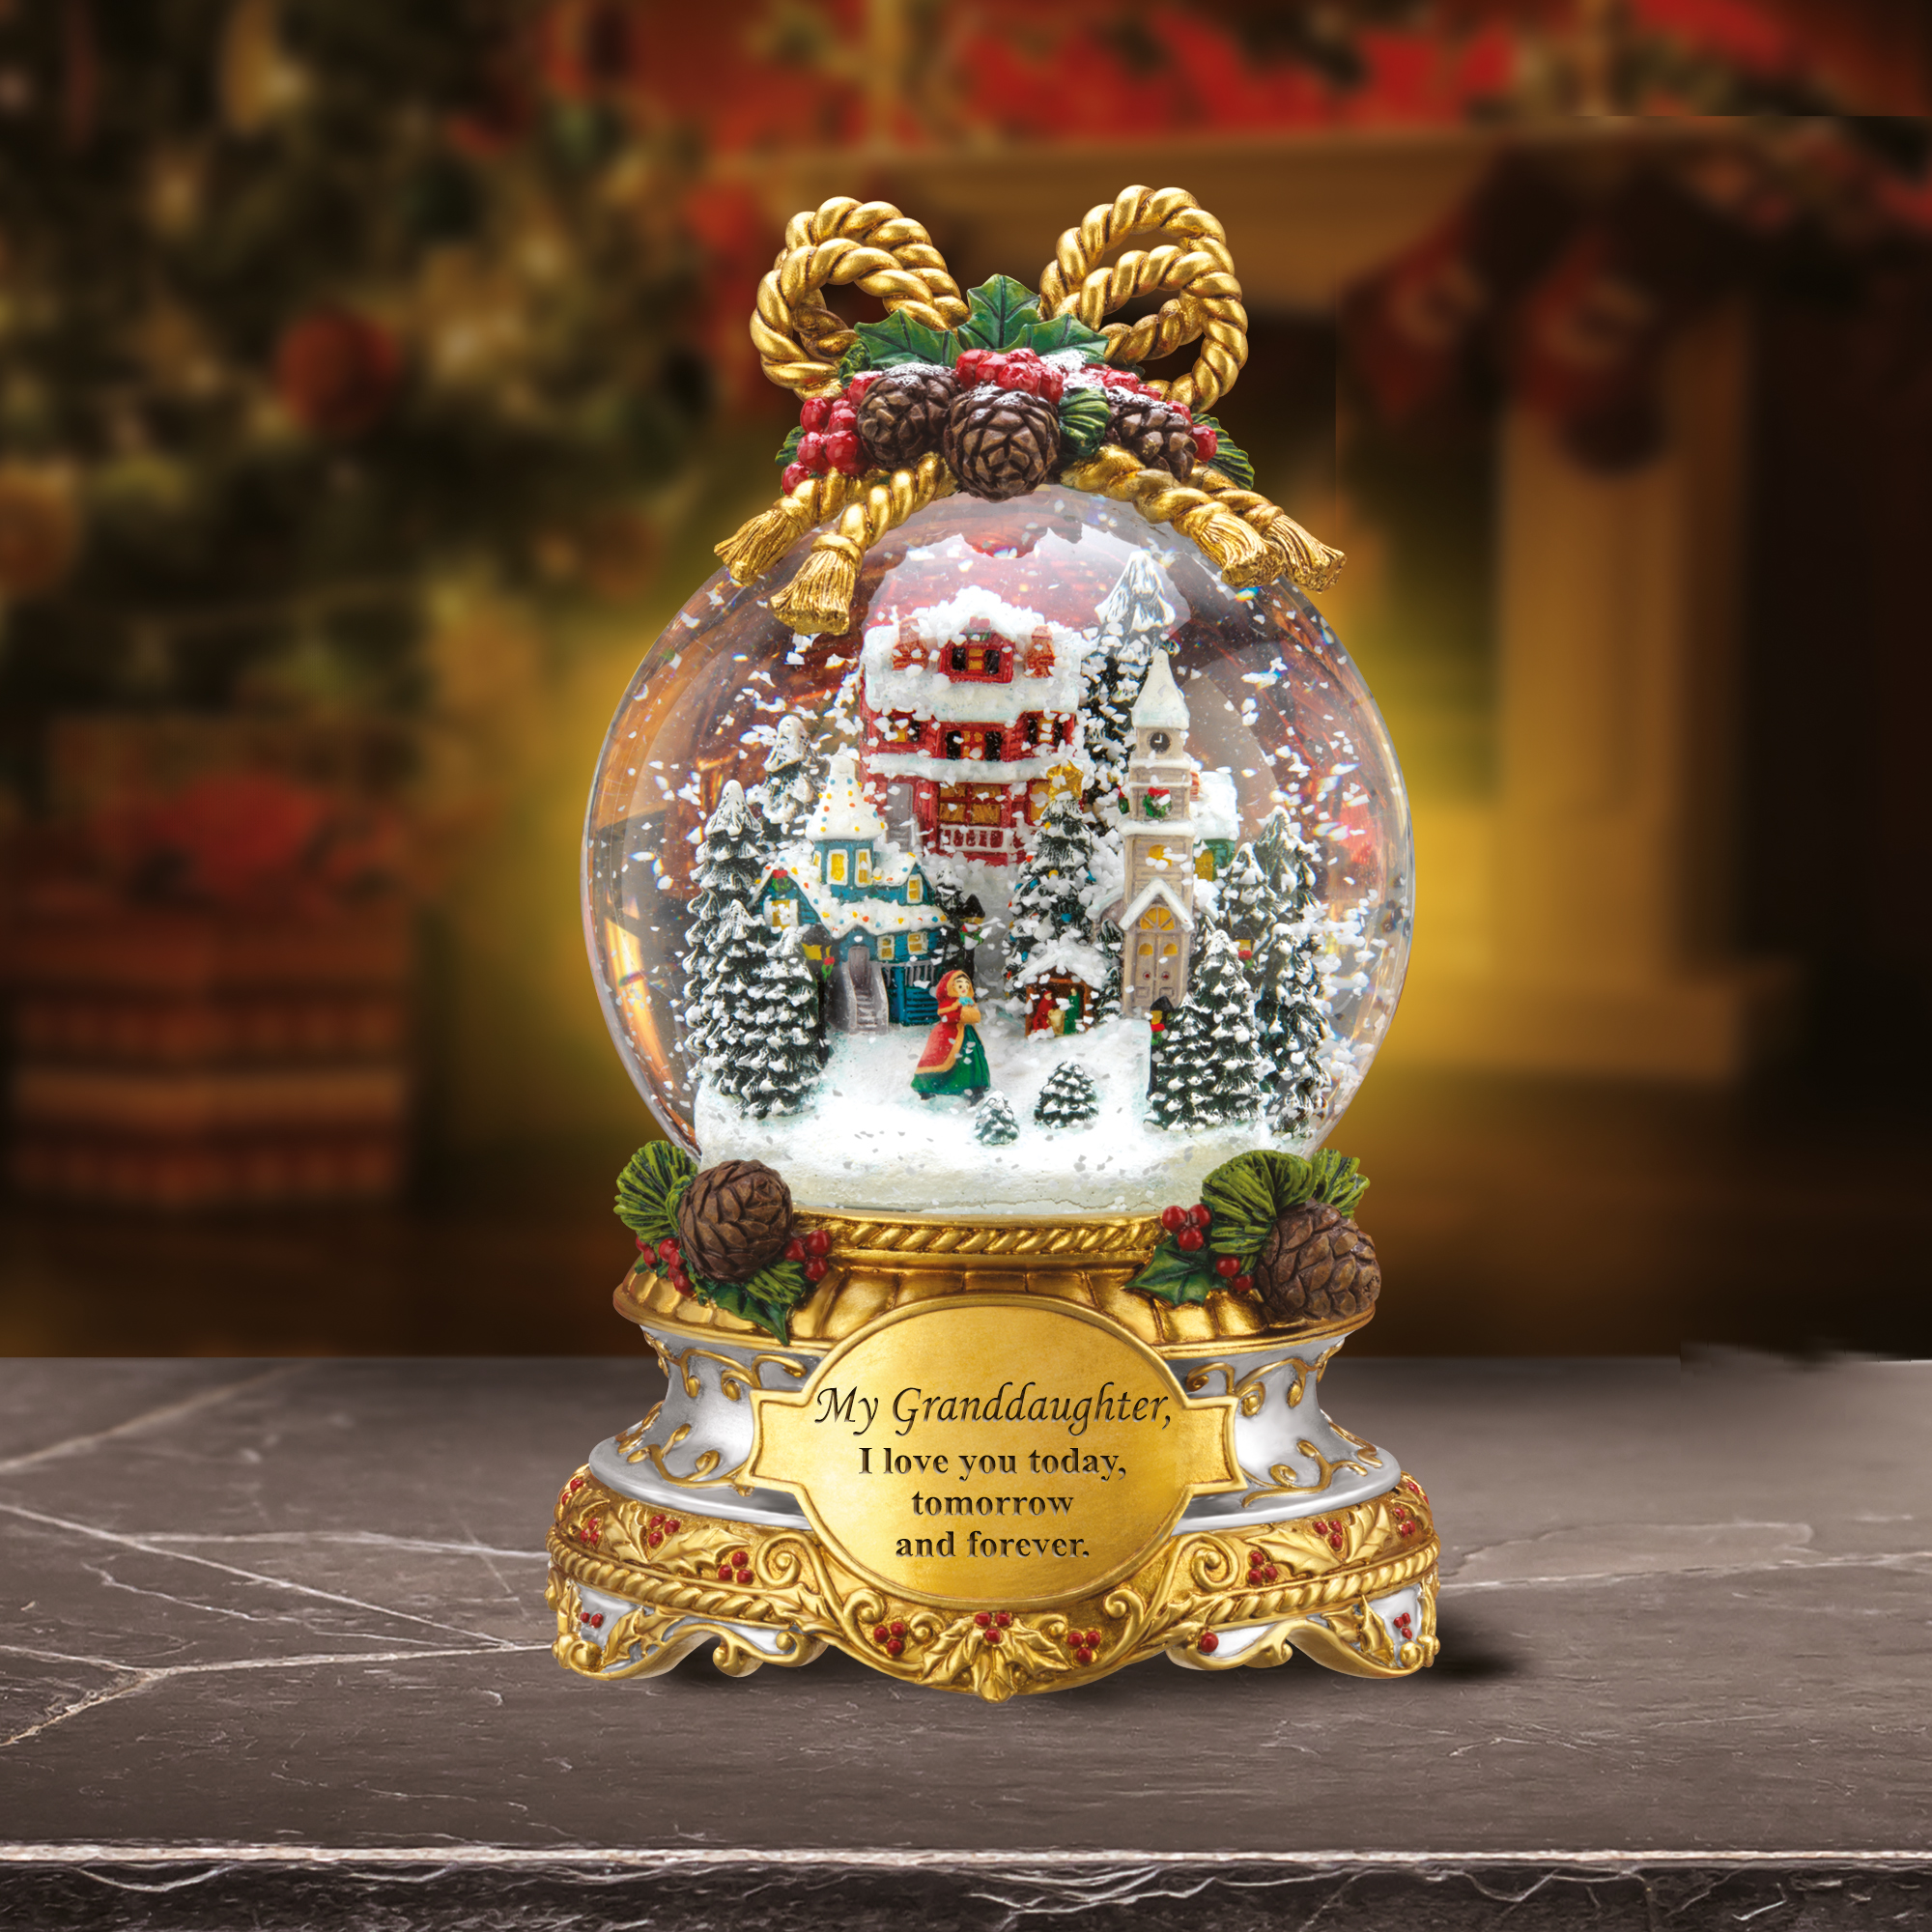 My Granddaughter Forever Lit Holiday Snow Globe 6814 0011 a main